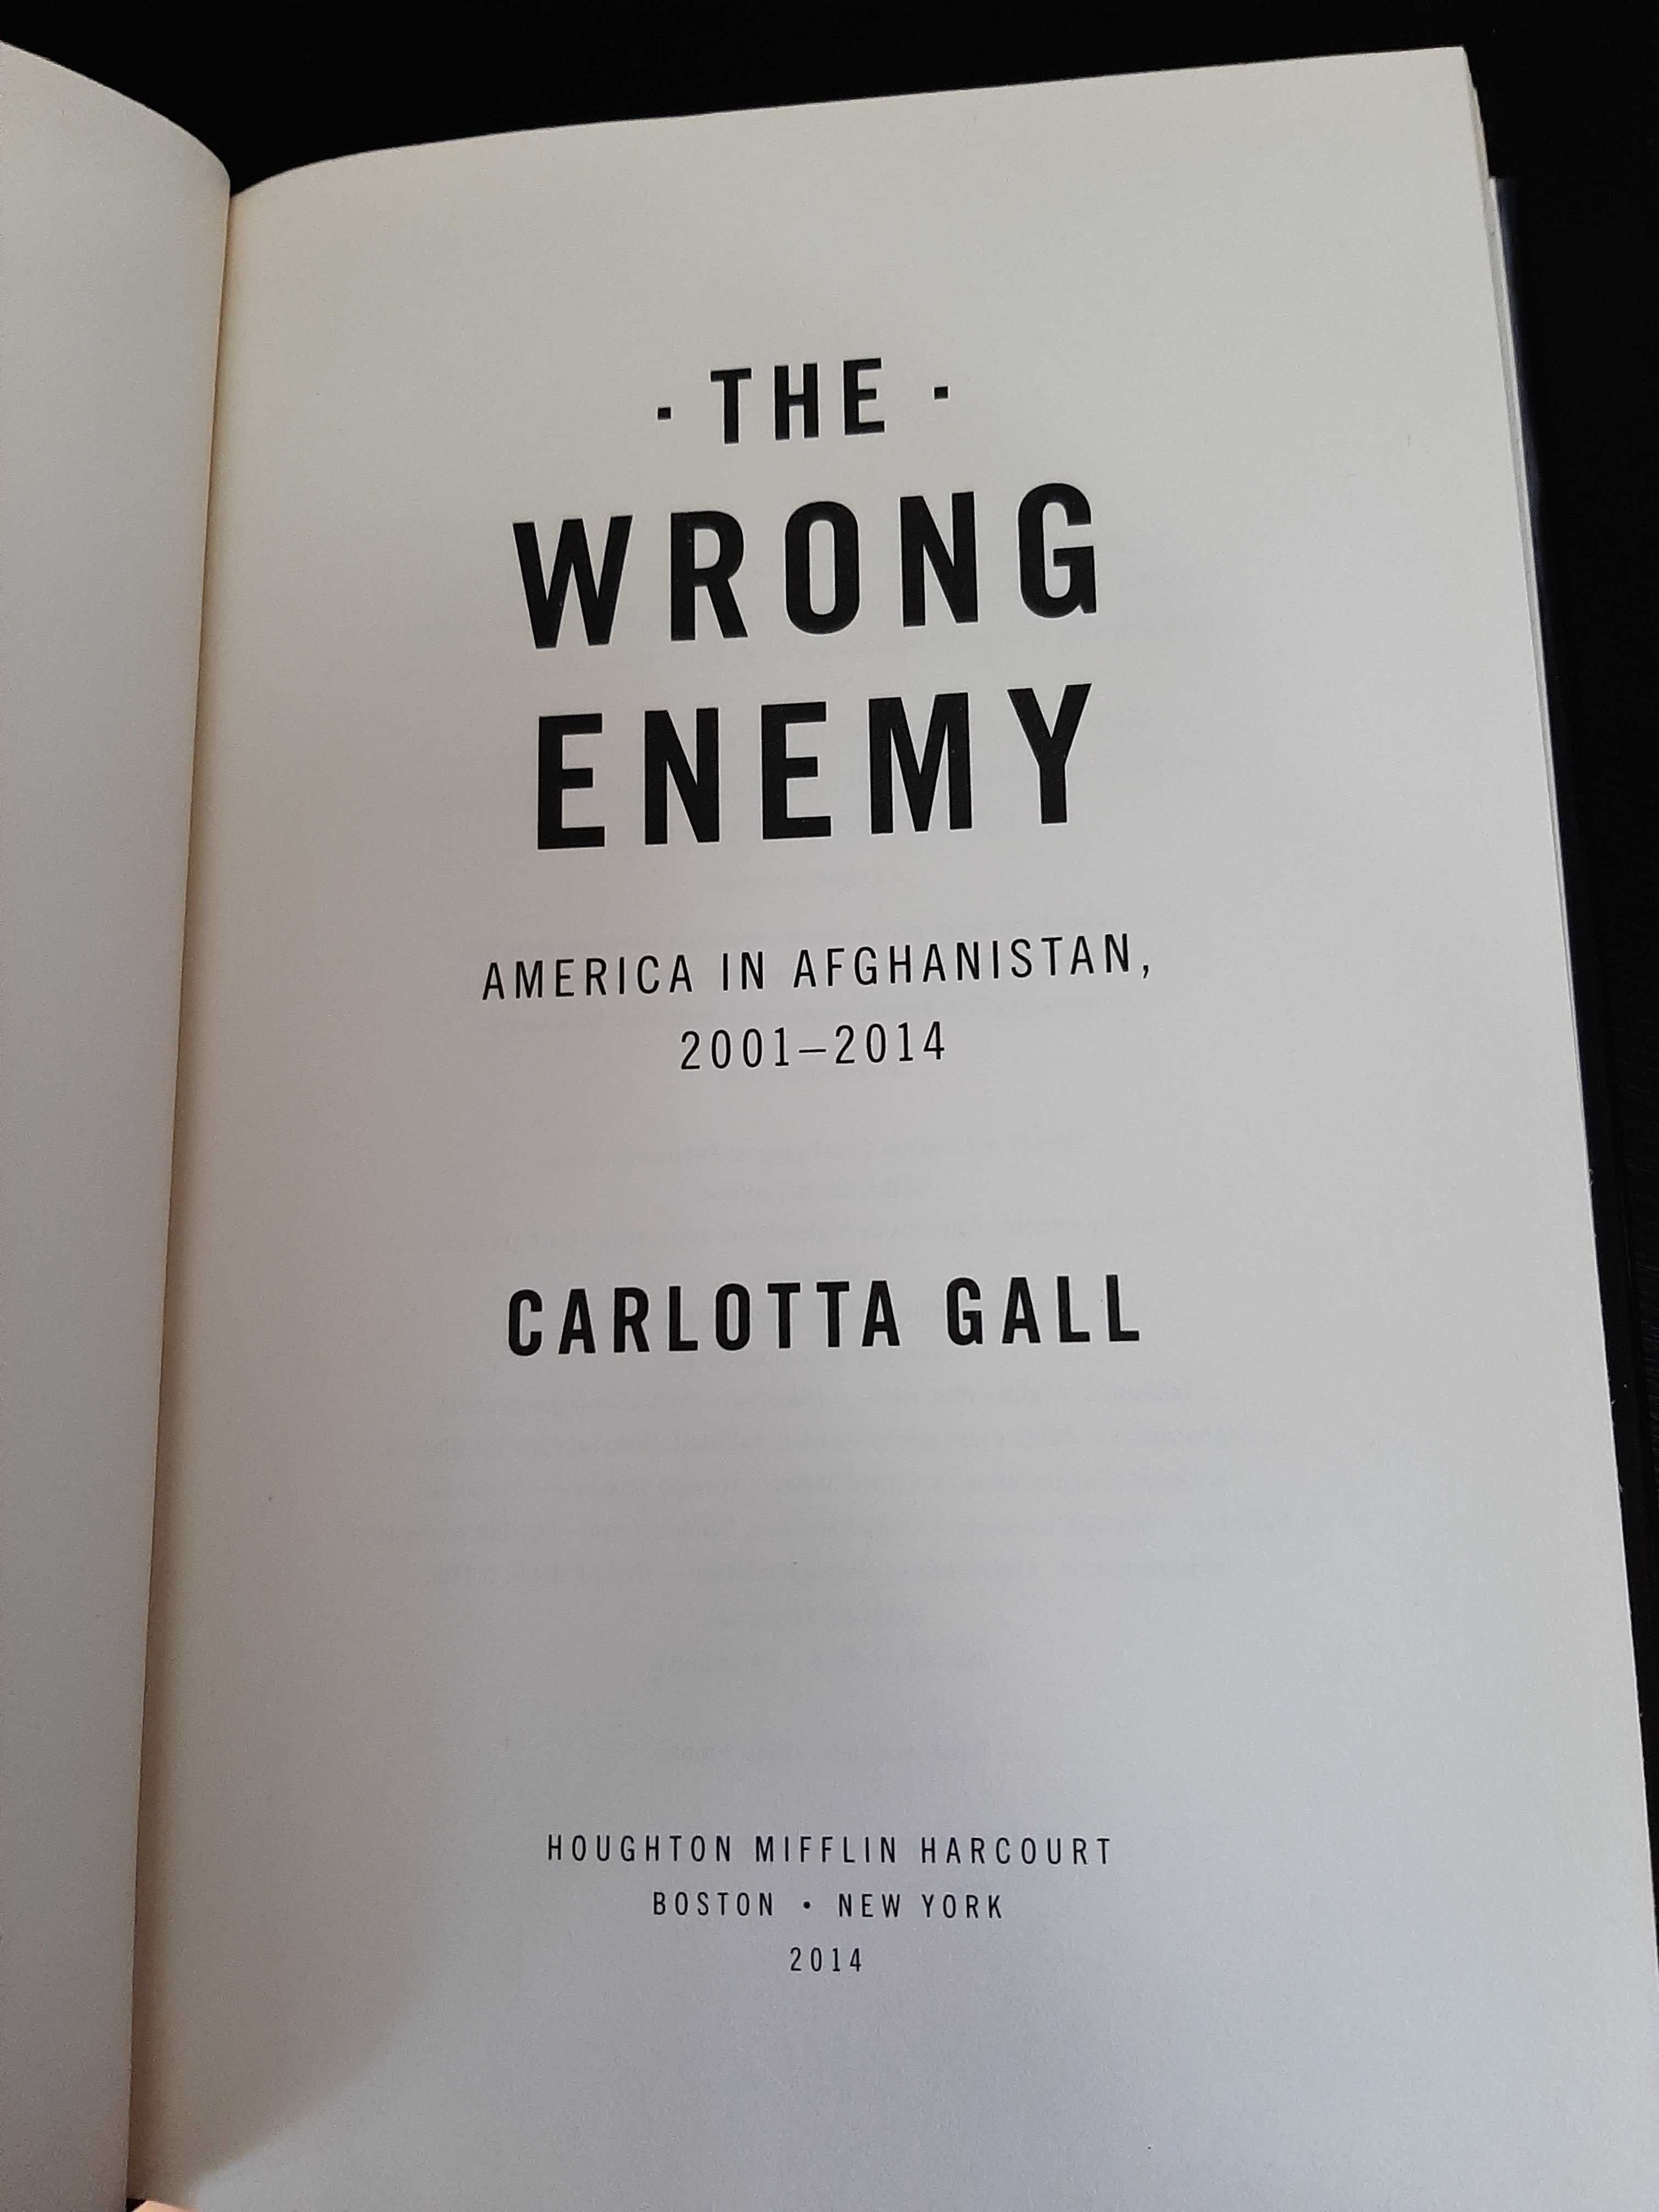 Carlotta Gall – The Wrong Enemy: America in Afghanistan, 2001 to 2014